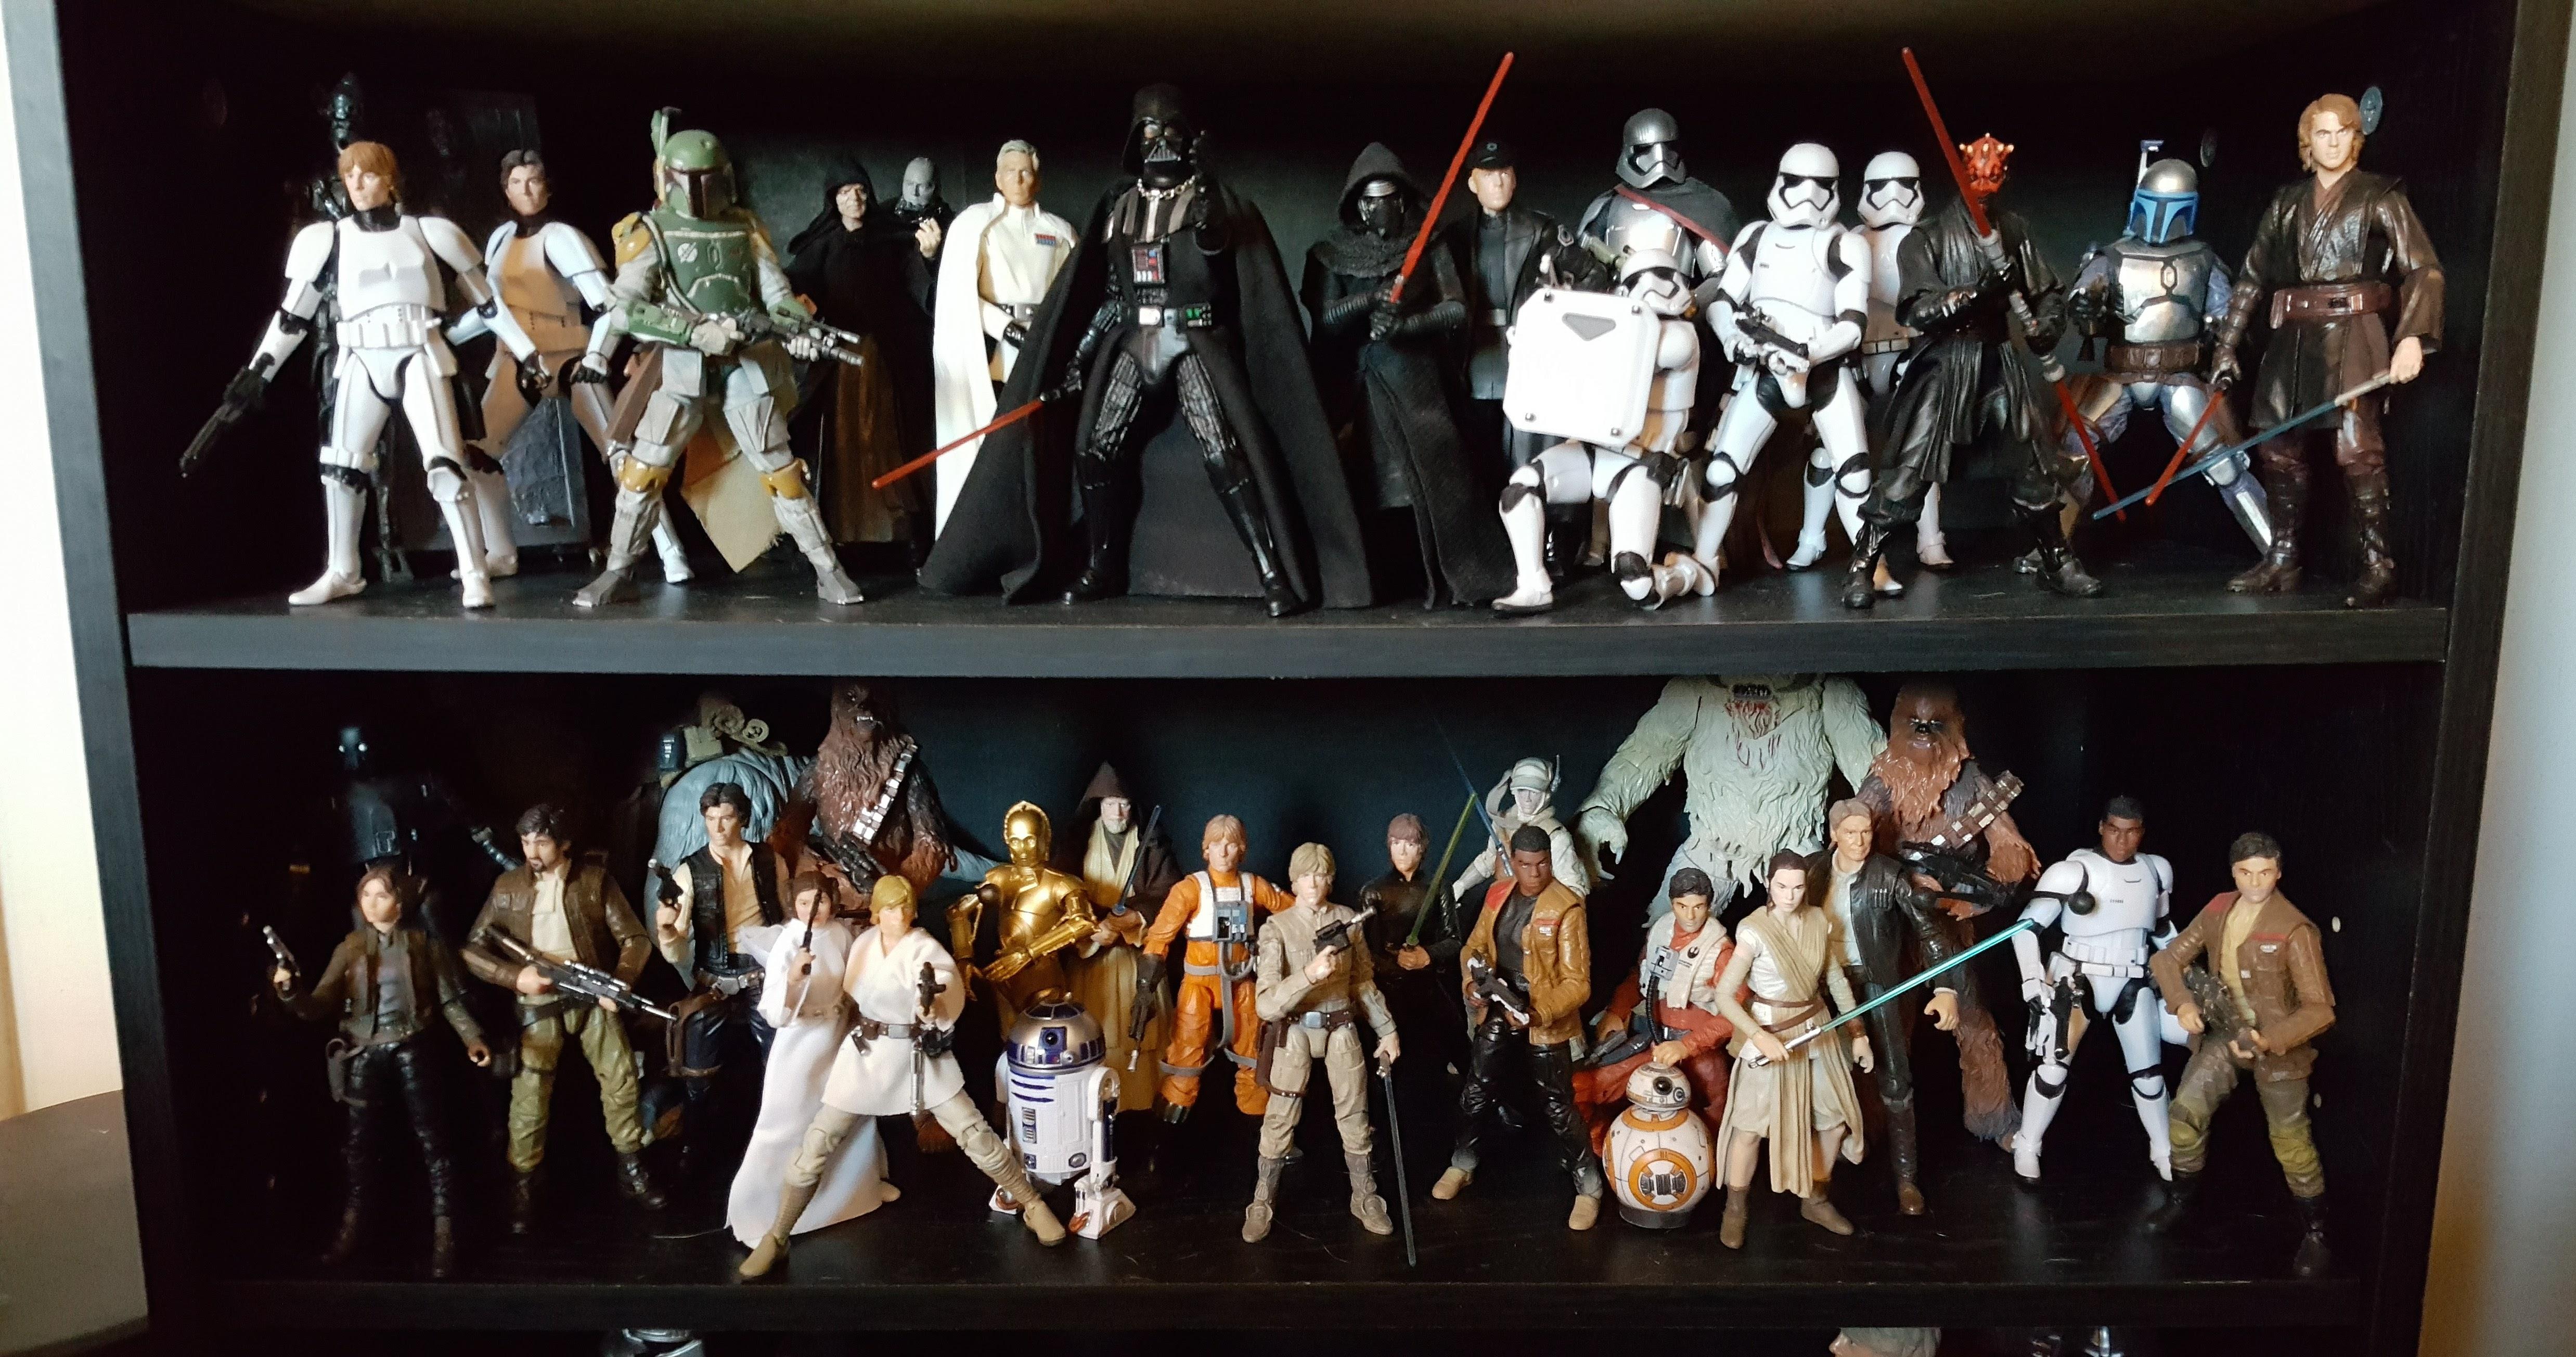 star wars collection toys